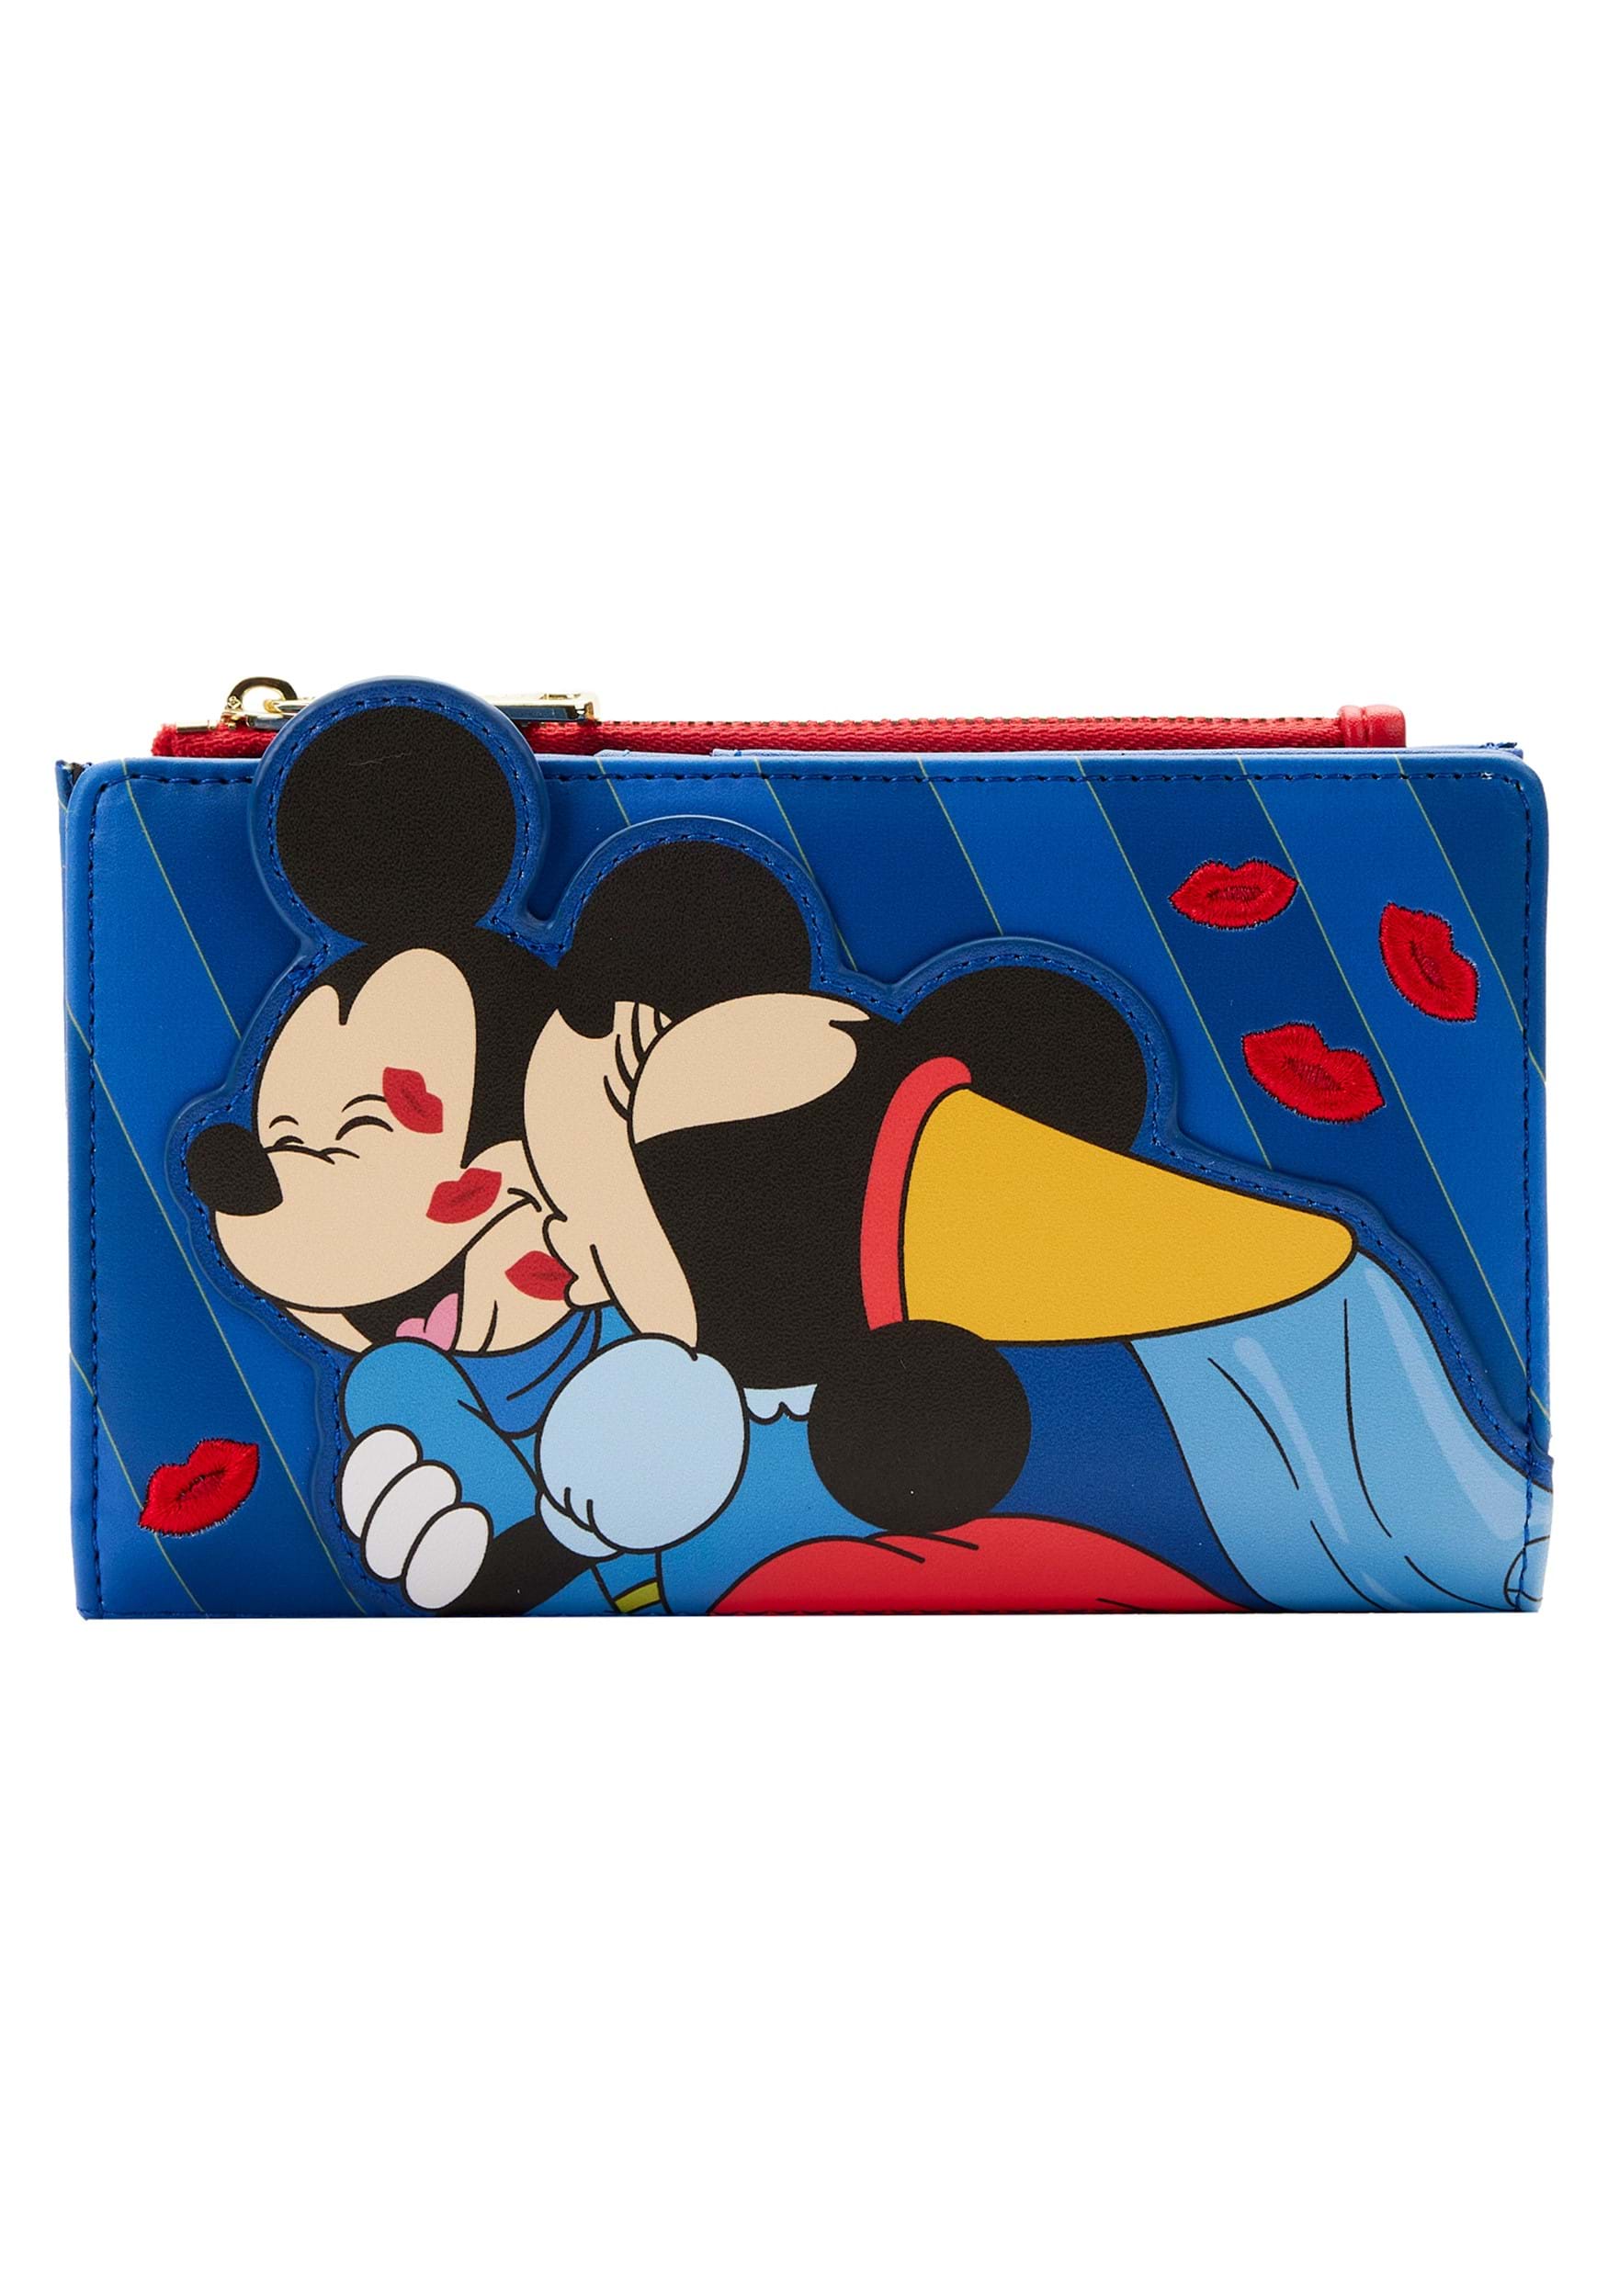 Disney Brave Little Tailor Mickey Minnie Loungefly Flap Wallet